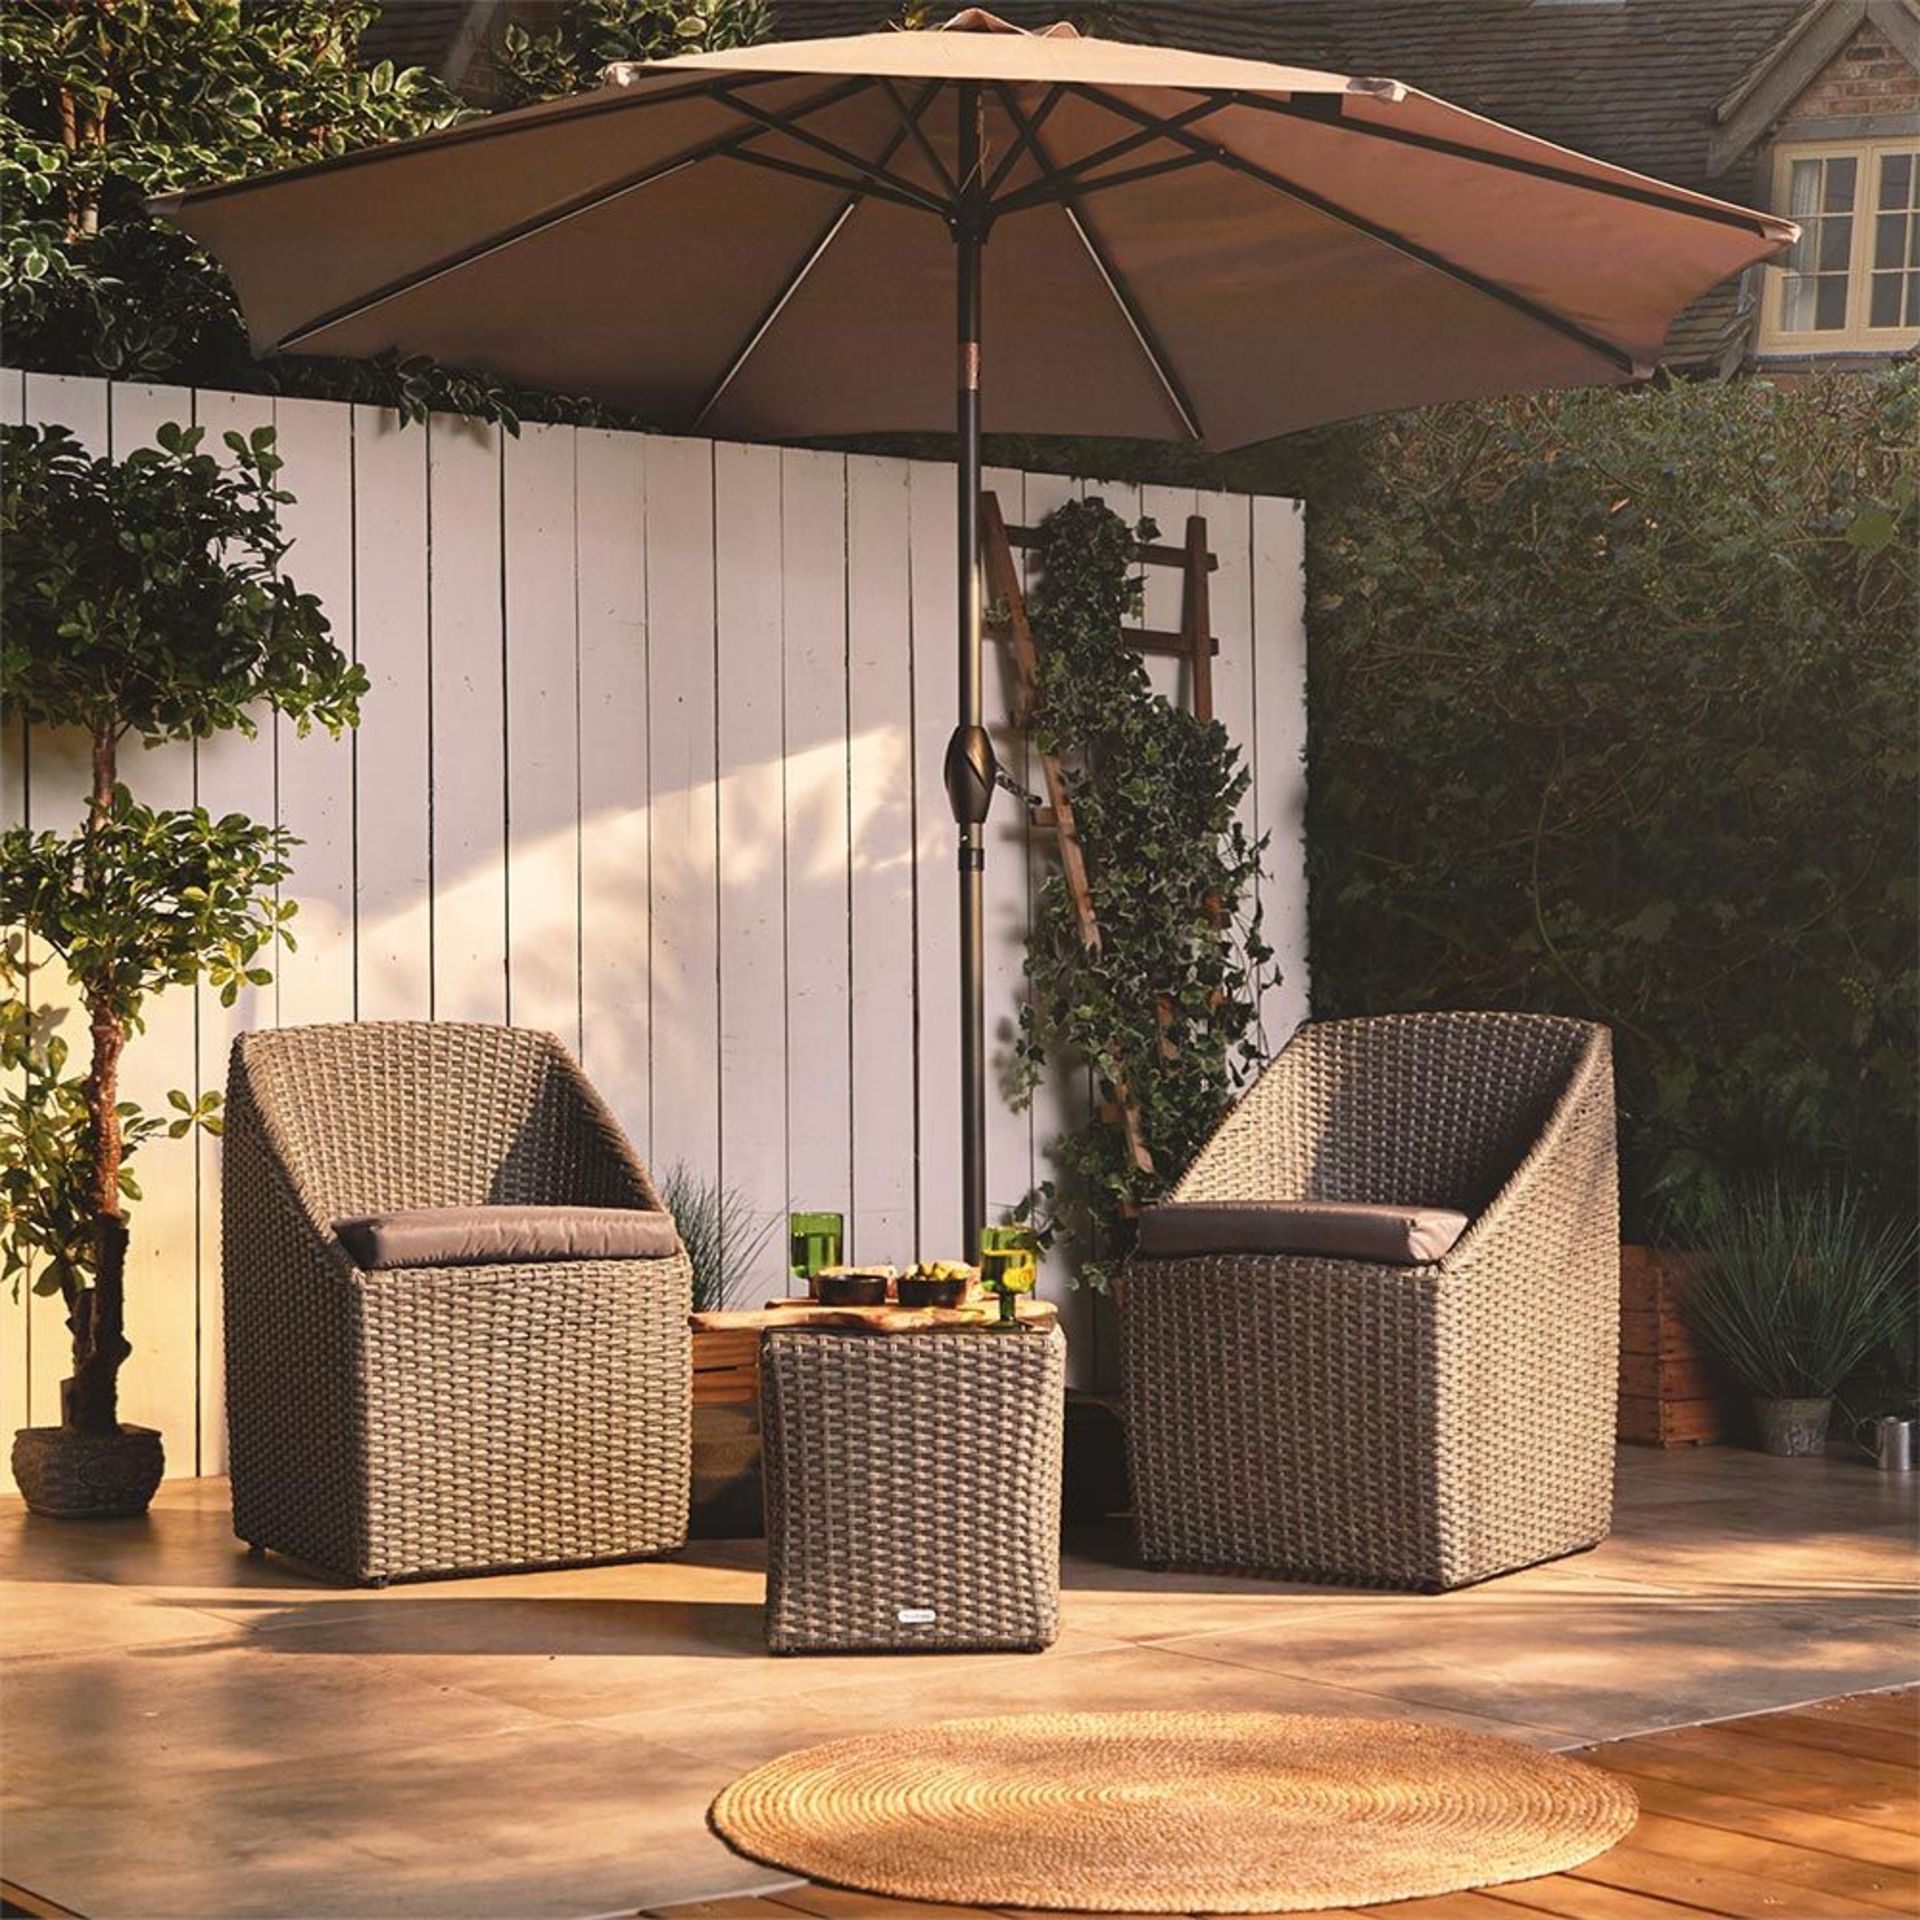 Luxury Rattan Bistro Set. Whether you have a large garden or a small balcony, this bistro set is the